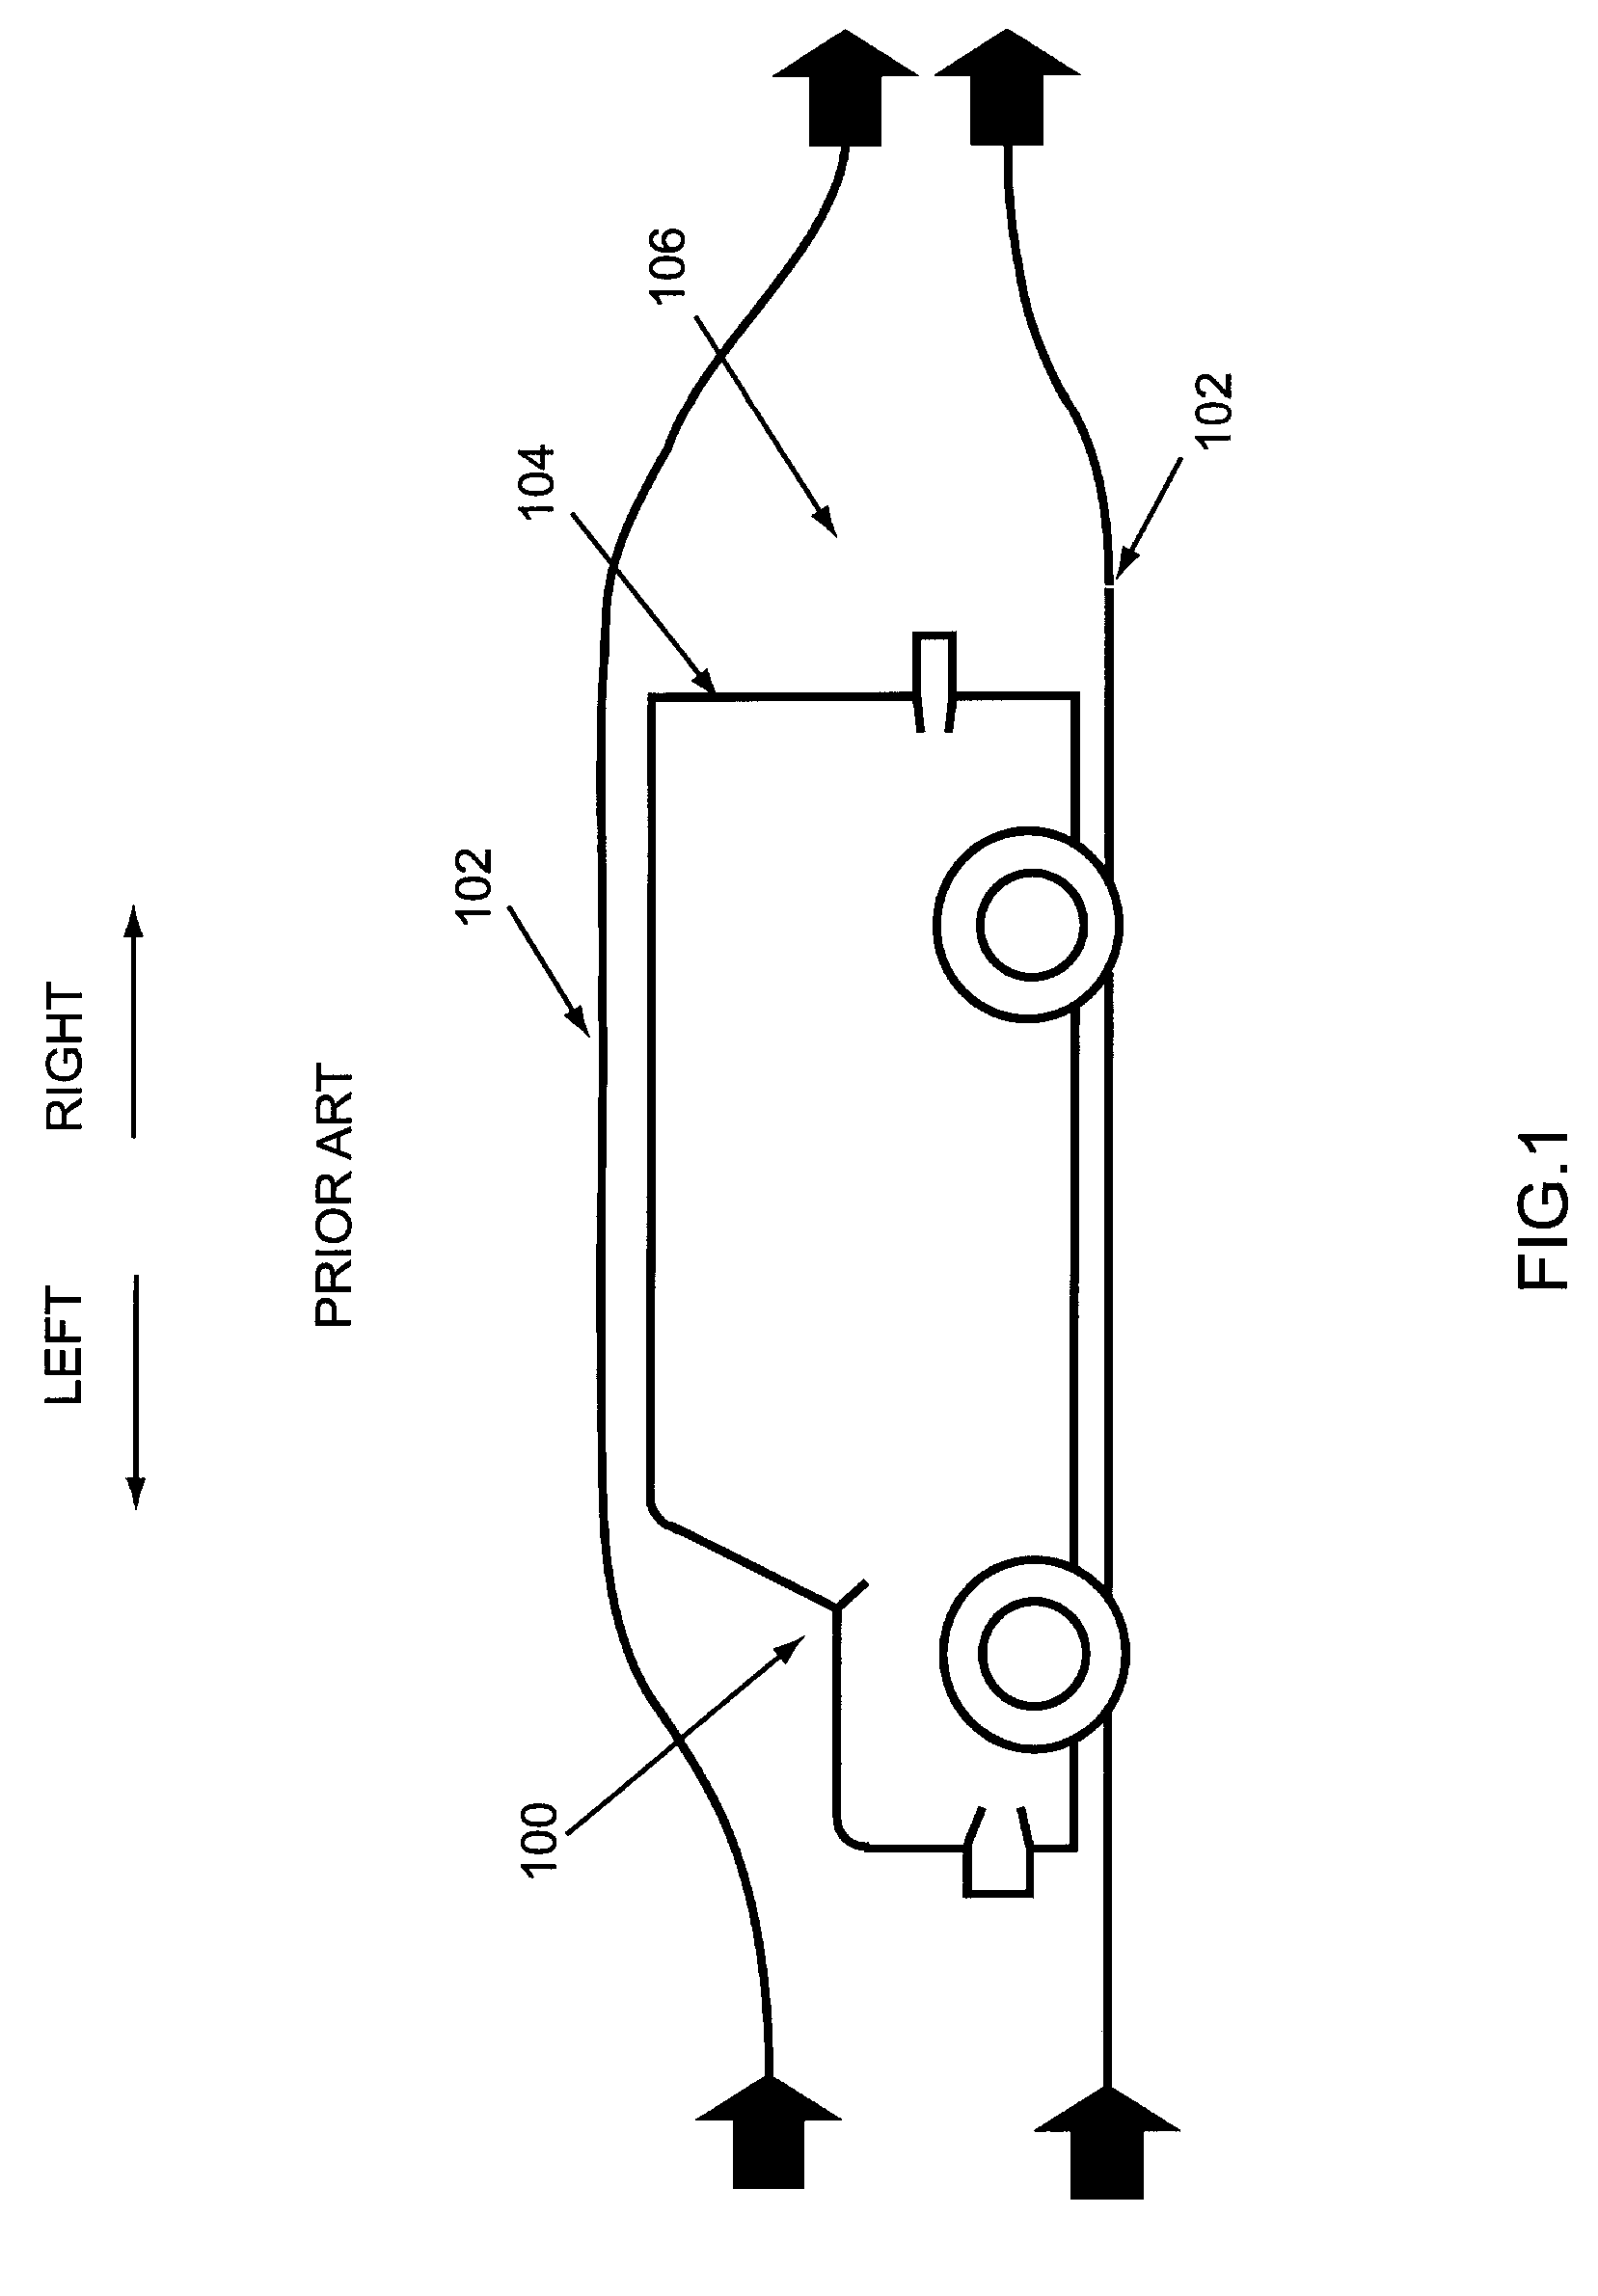 Pressure Drag Reduction System with a Side Duct